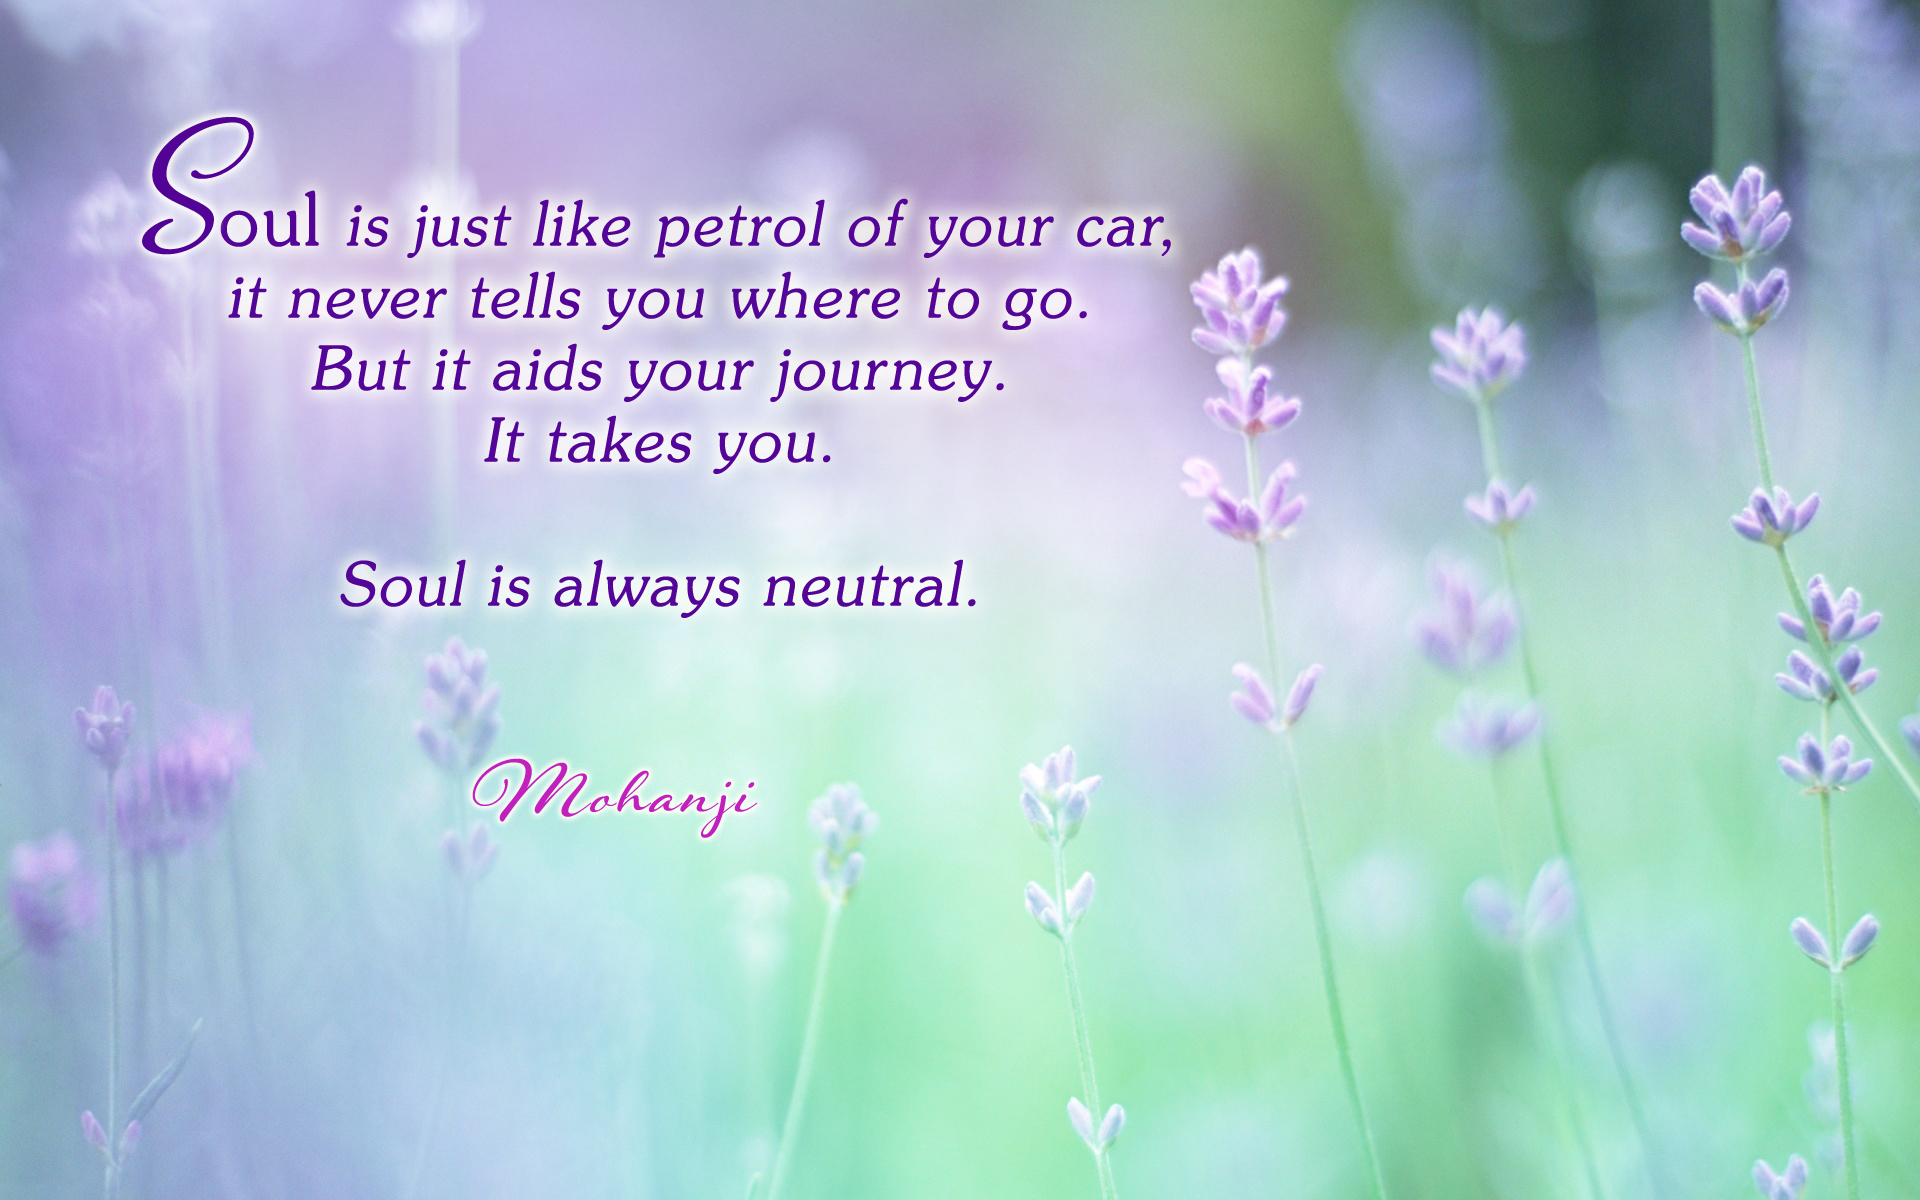 Mohanji quote - Soul is just like petrol in your car